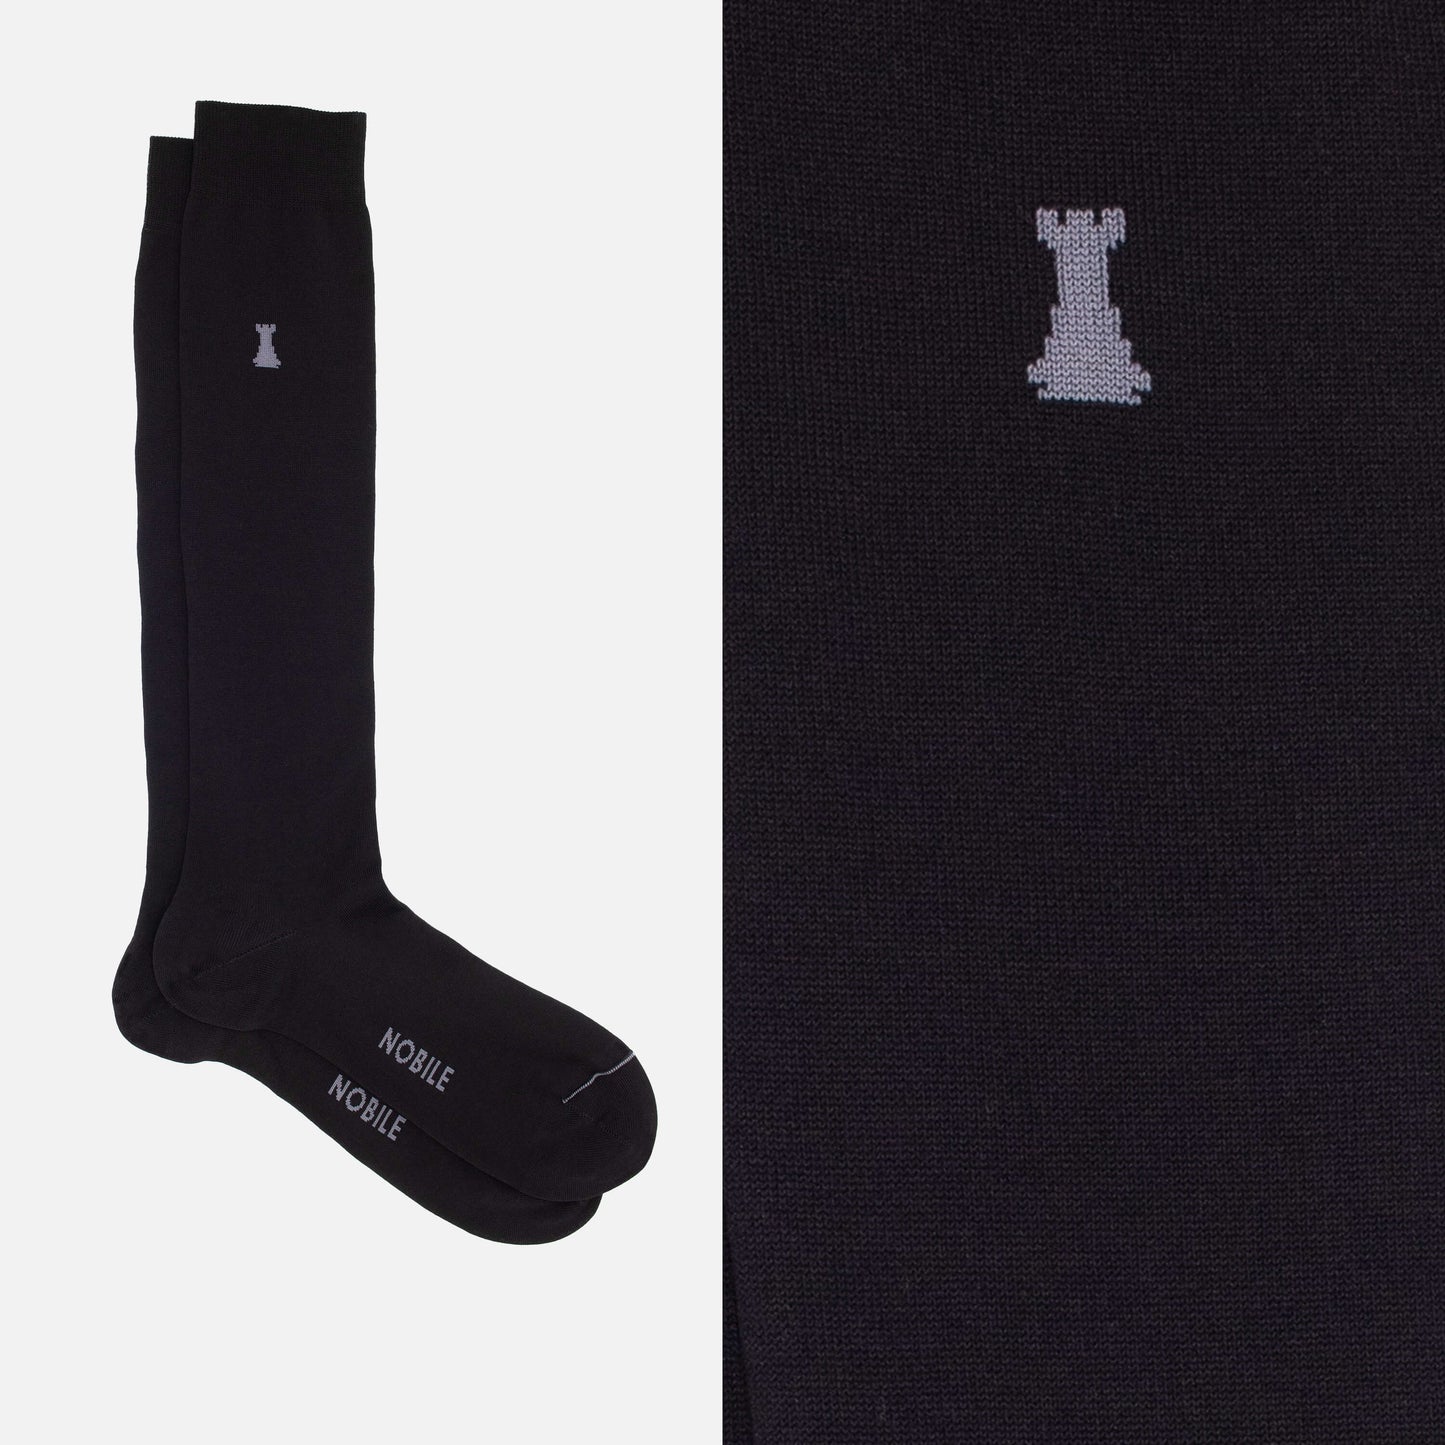 Daily Office Box of 6 knee high socks- 3x solid color & 3x Micro Ribs